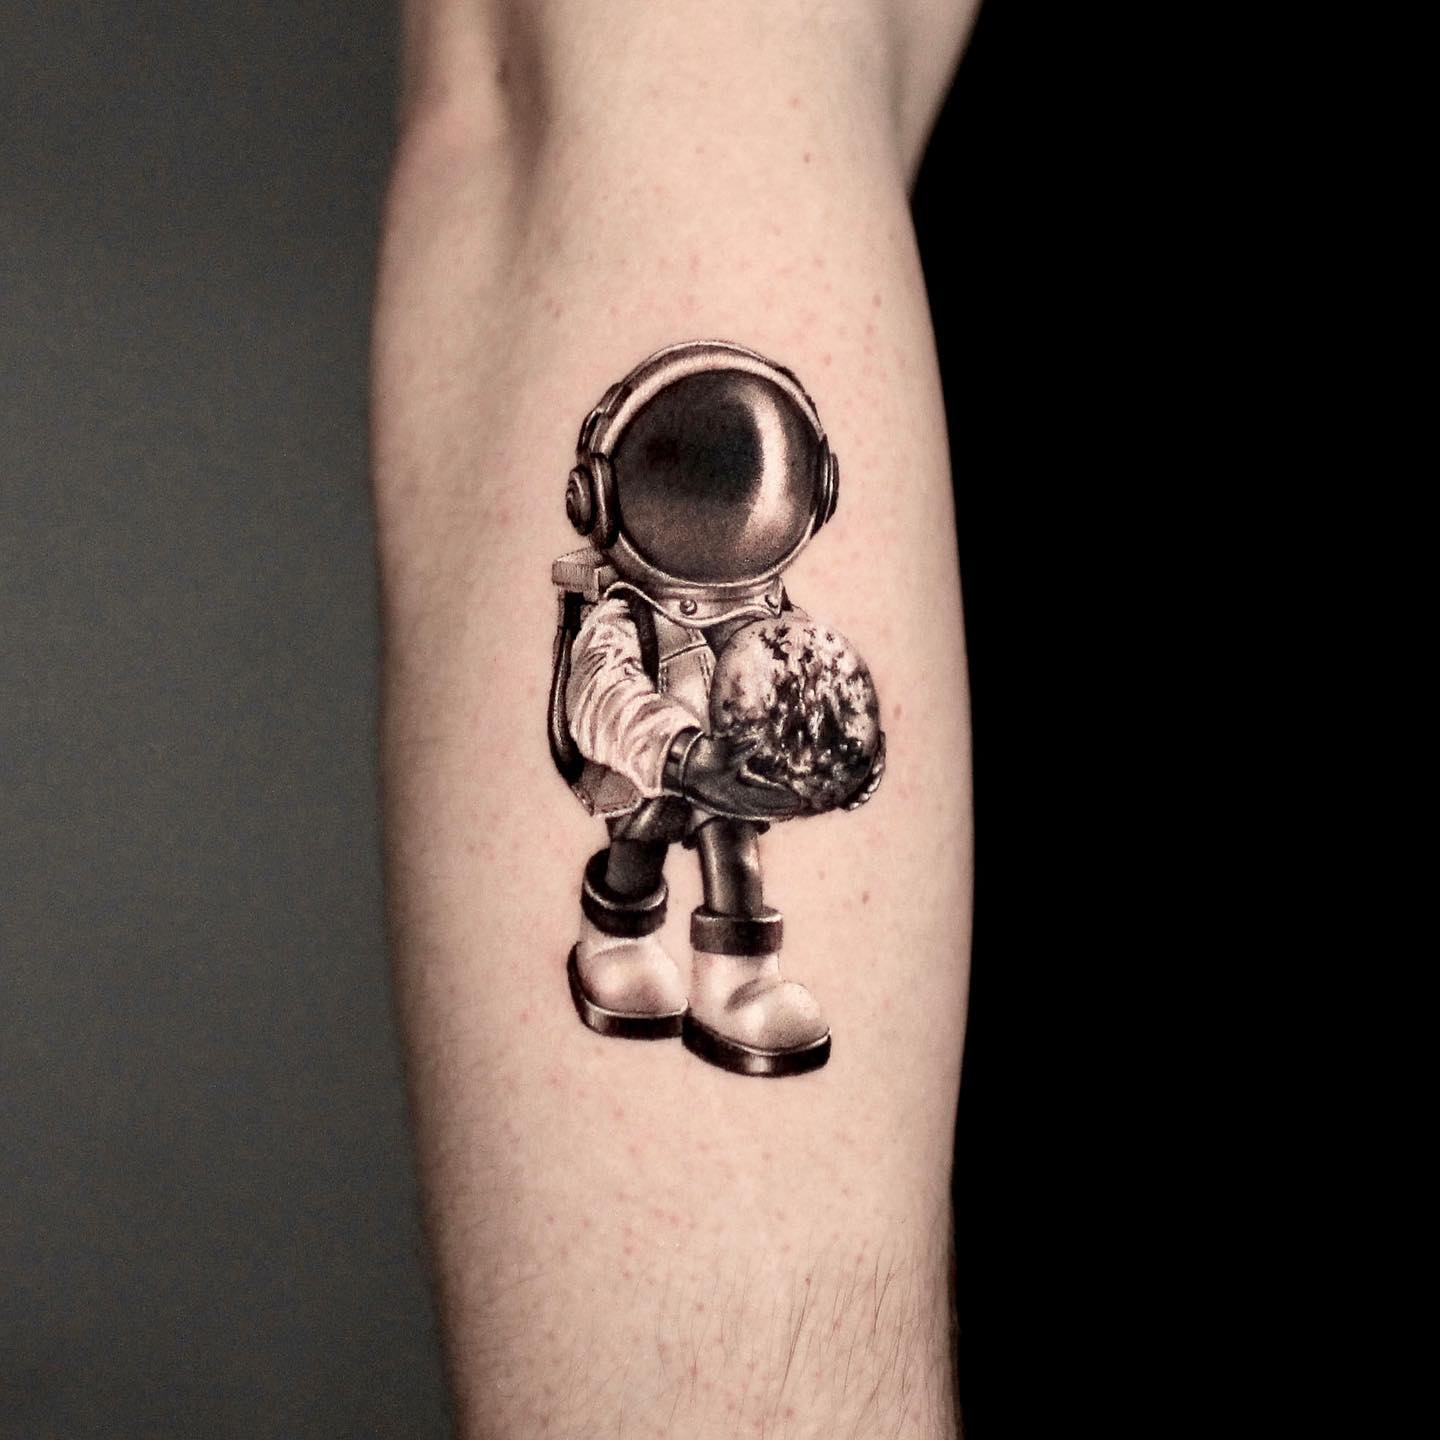 Astranaut tattoo on sleeve by chan hontattoo